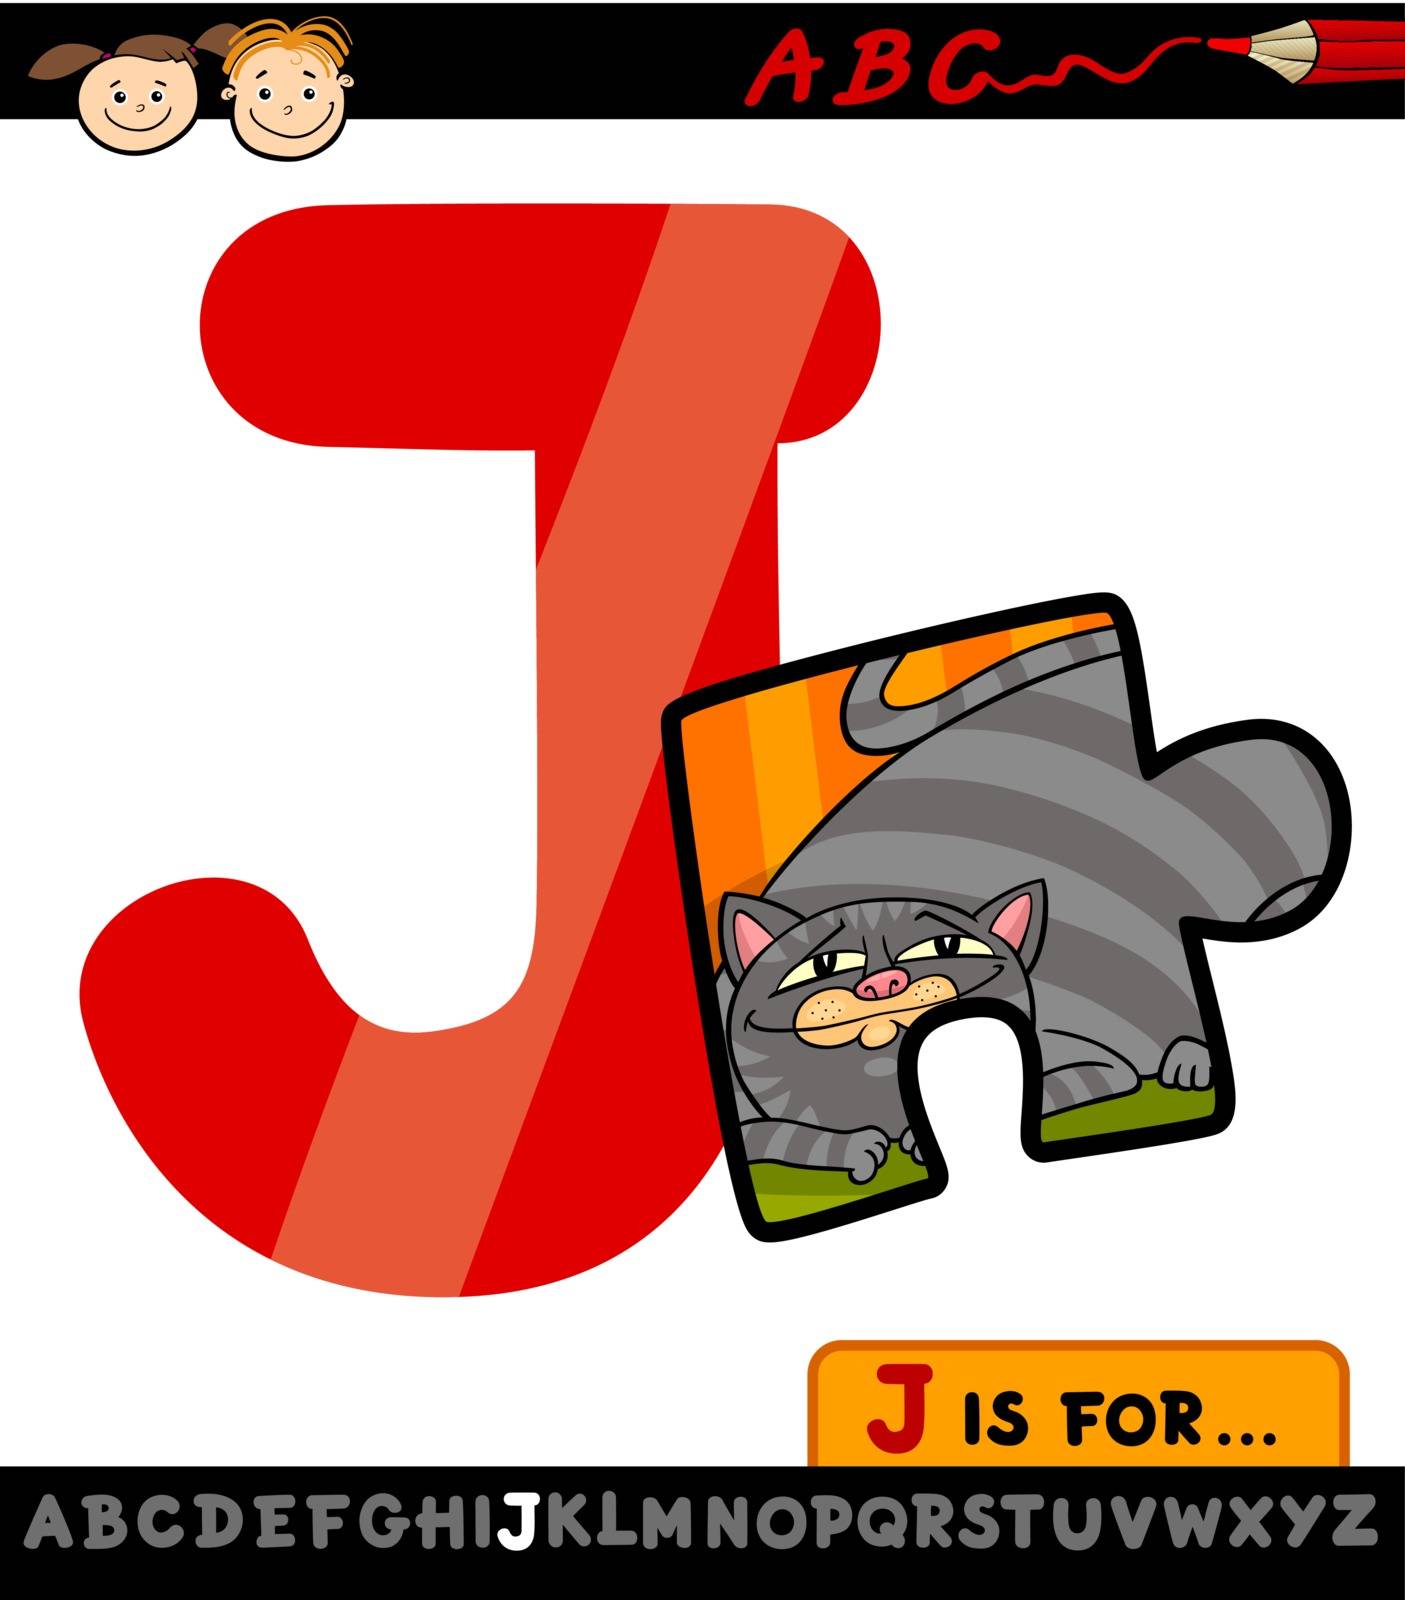 Cartoon Illustration of Capital Letter J from Alphabet with Jigsaw for Children Education